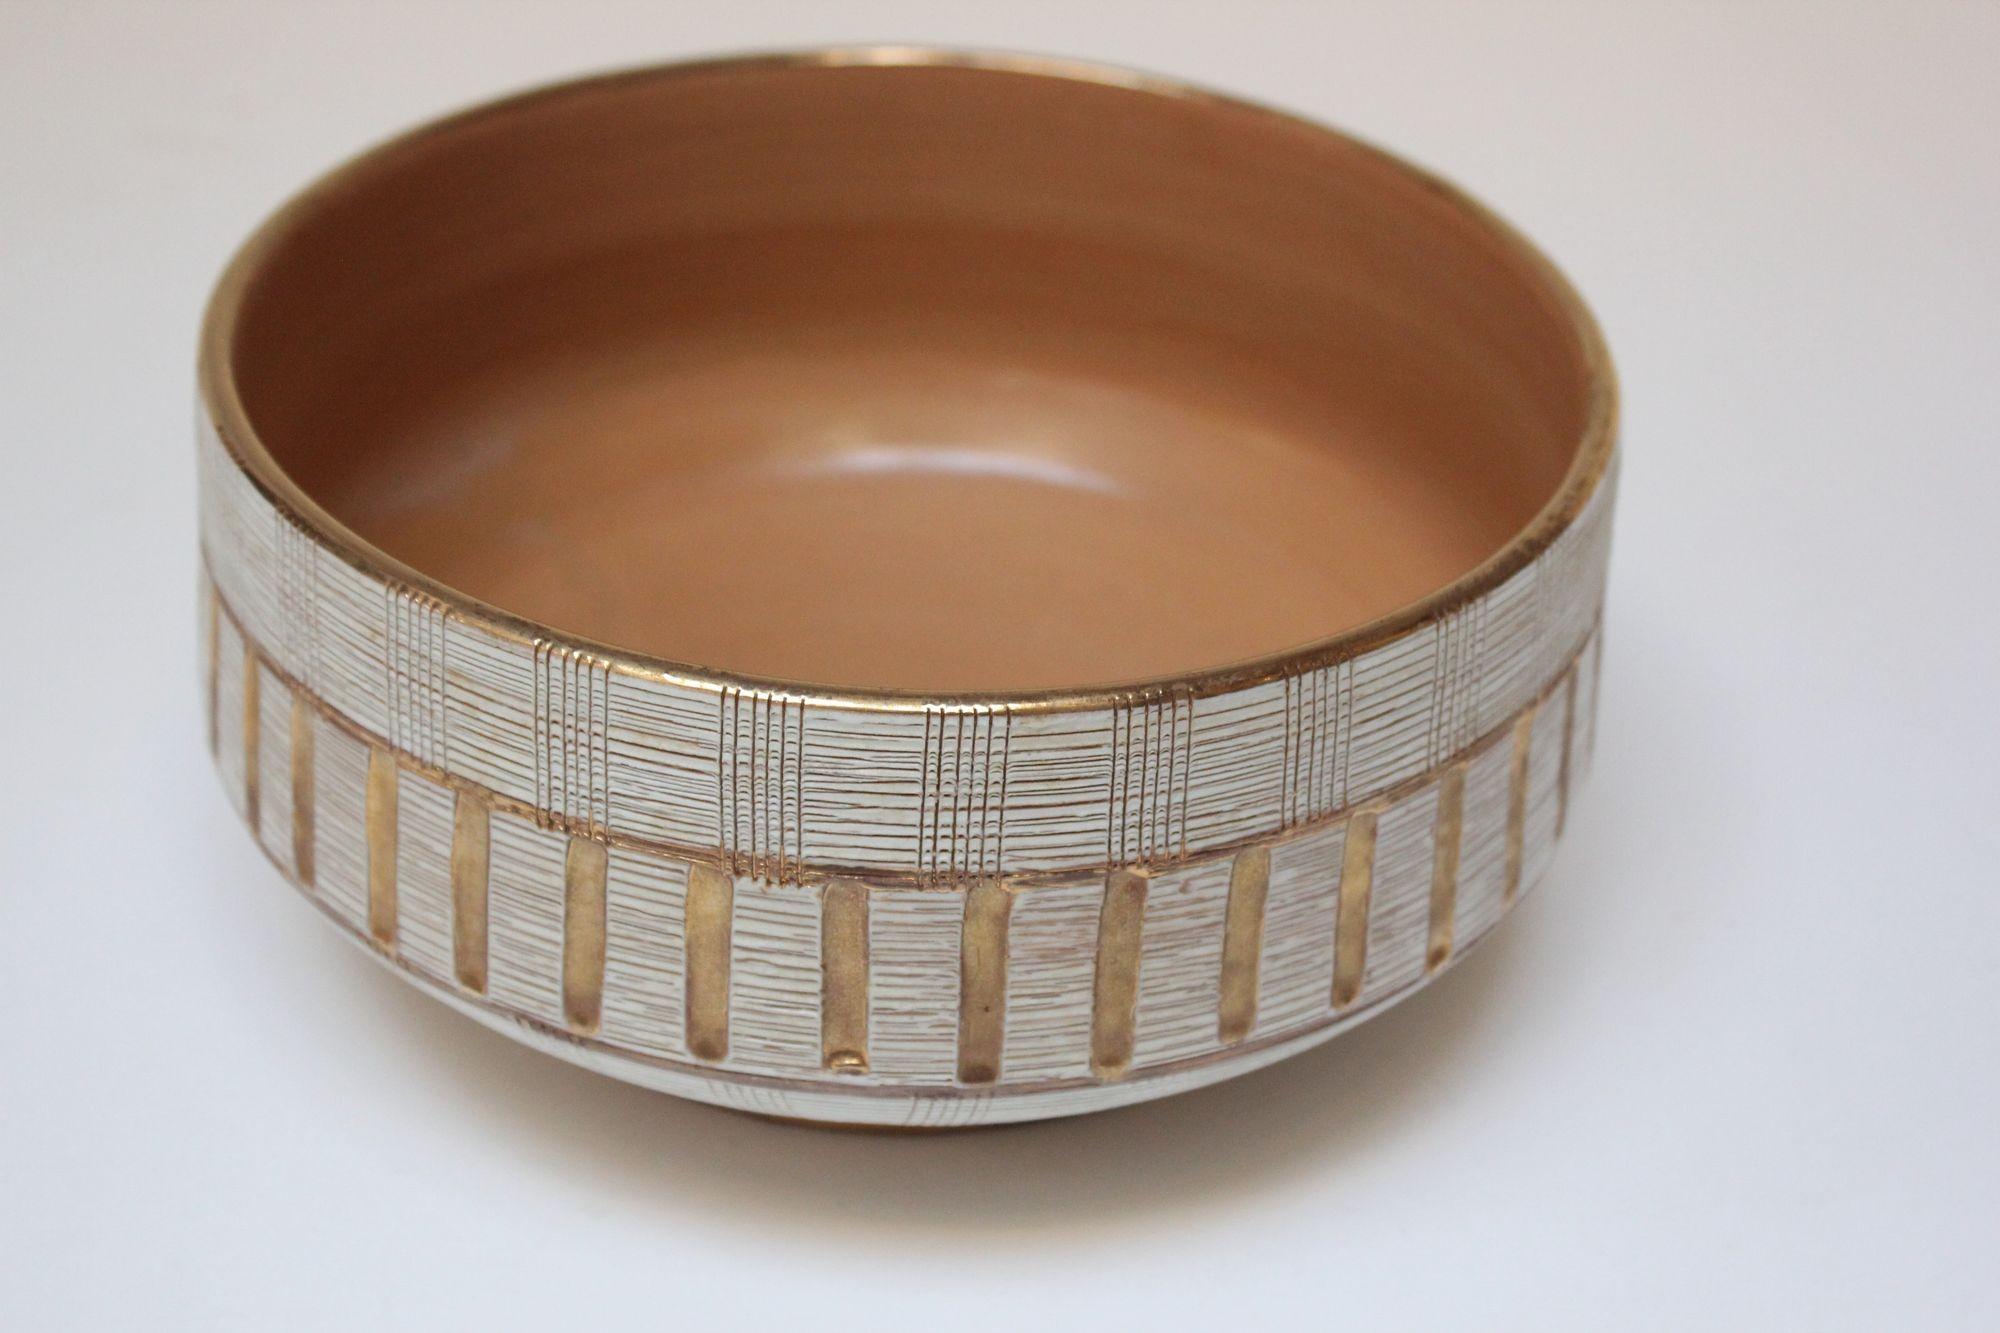 Glamorous vintage ceramic bowl with incised design and hand-painted gold accents designed by Aldo Londi for Bitossi (ca. 1950s, ltaly).
The etched sgraffito linear pattern reveals the beige base under the matte white glaze.
Excellent, vintage